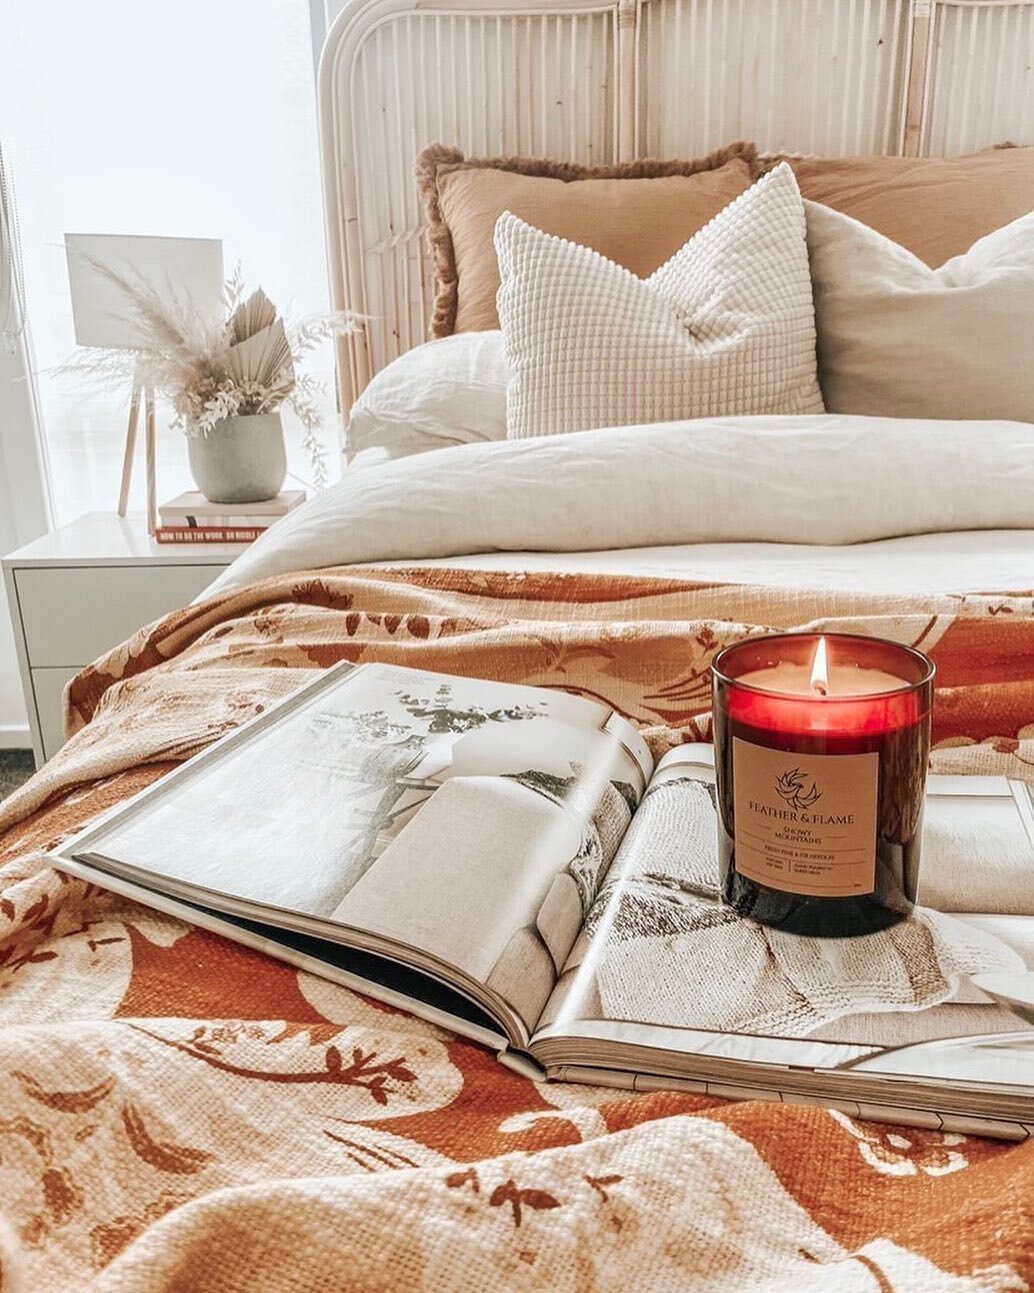 Bedroom goals right here 🤎

We absolutely love this shot taken by Bianca from @her.abode 

If you haven&rsquo;t already checked her account out, we recommend you head on over! 
.
.
.
.
.
#featherandflame #fromtheashes #bedroomgoals #bedroomdecor #sc